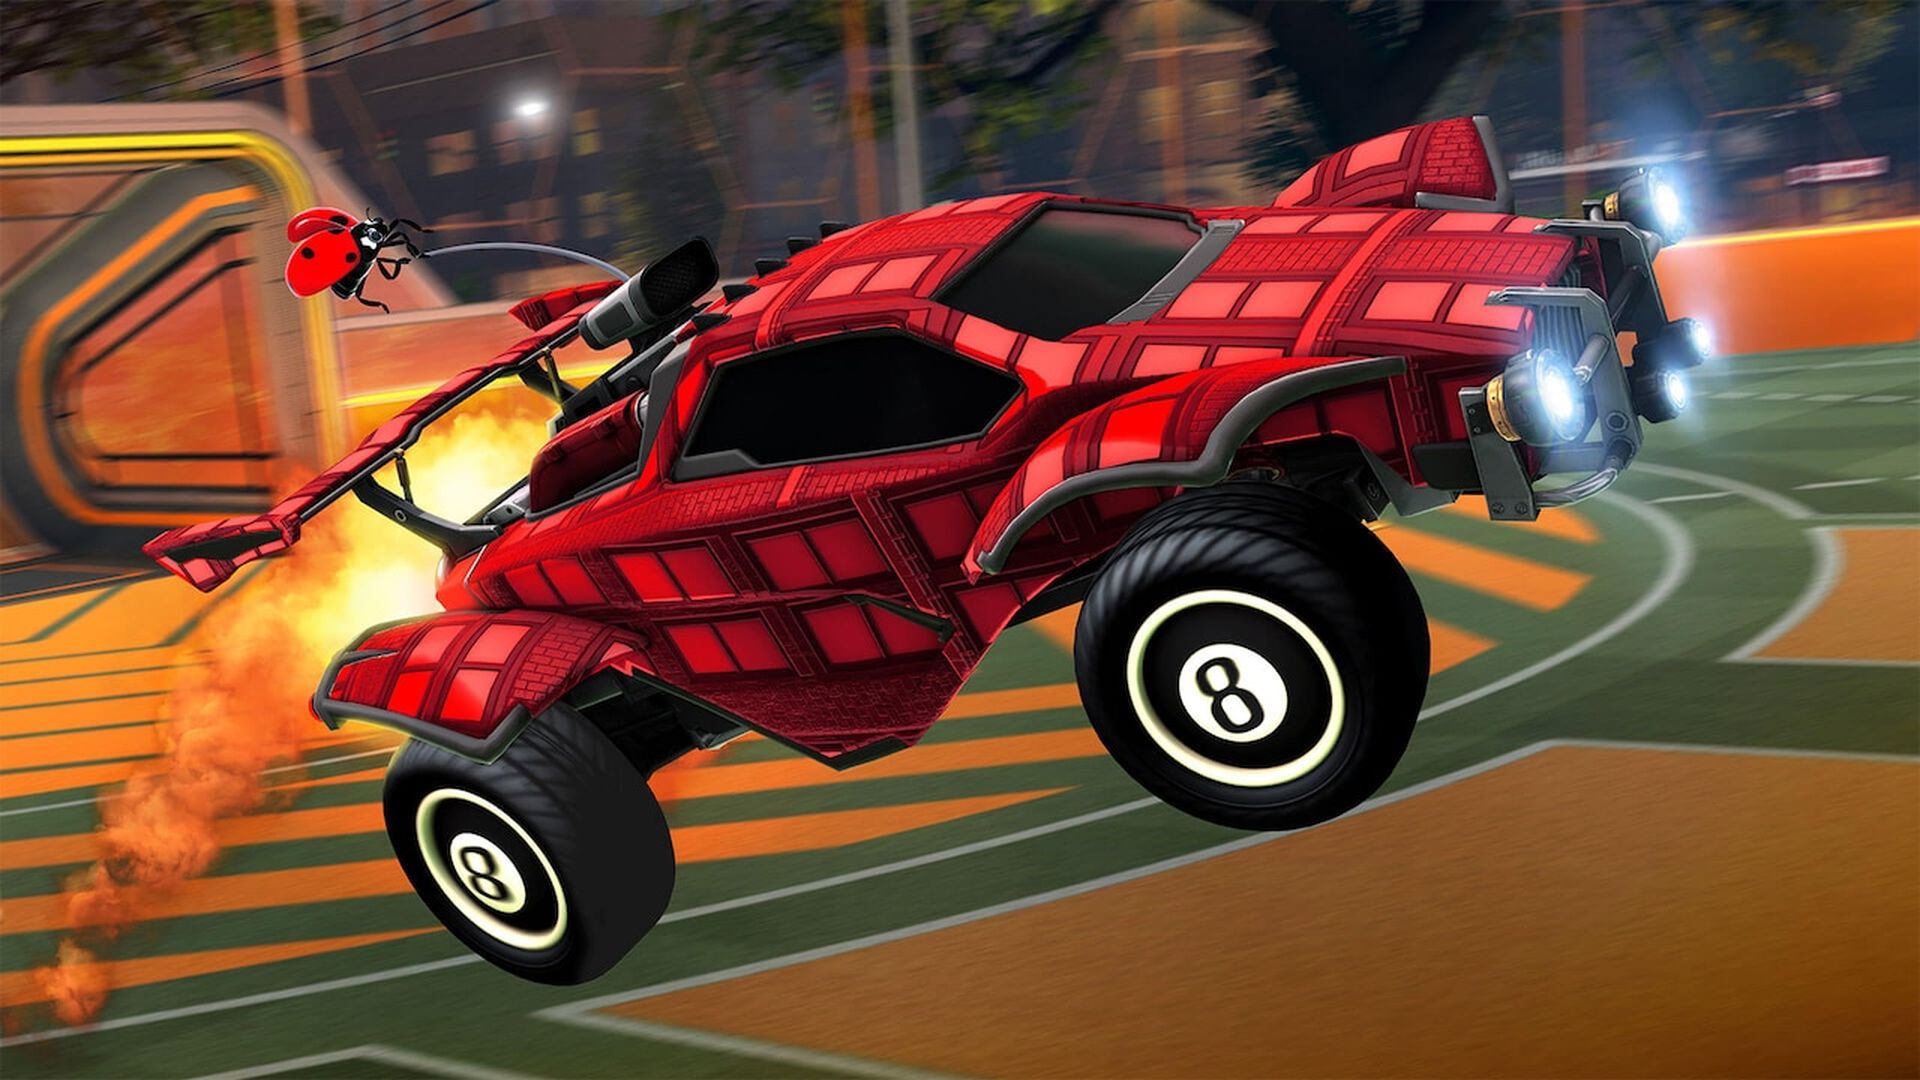 In this article, we are going to be covering is Rocket League on Steam, so you know if you can play it using the popular game store and launcher.